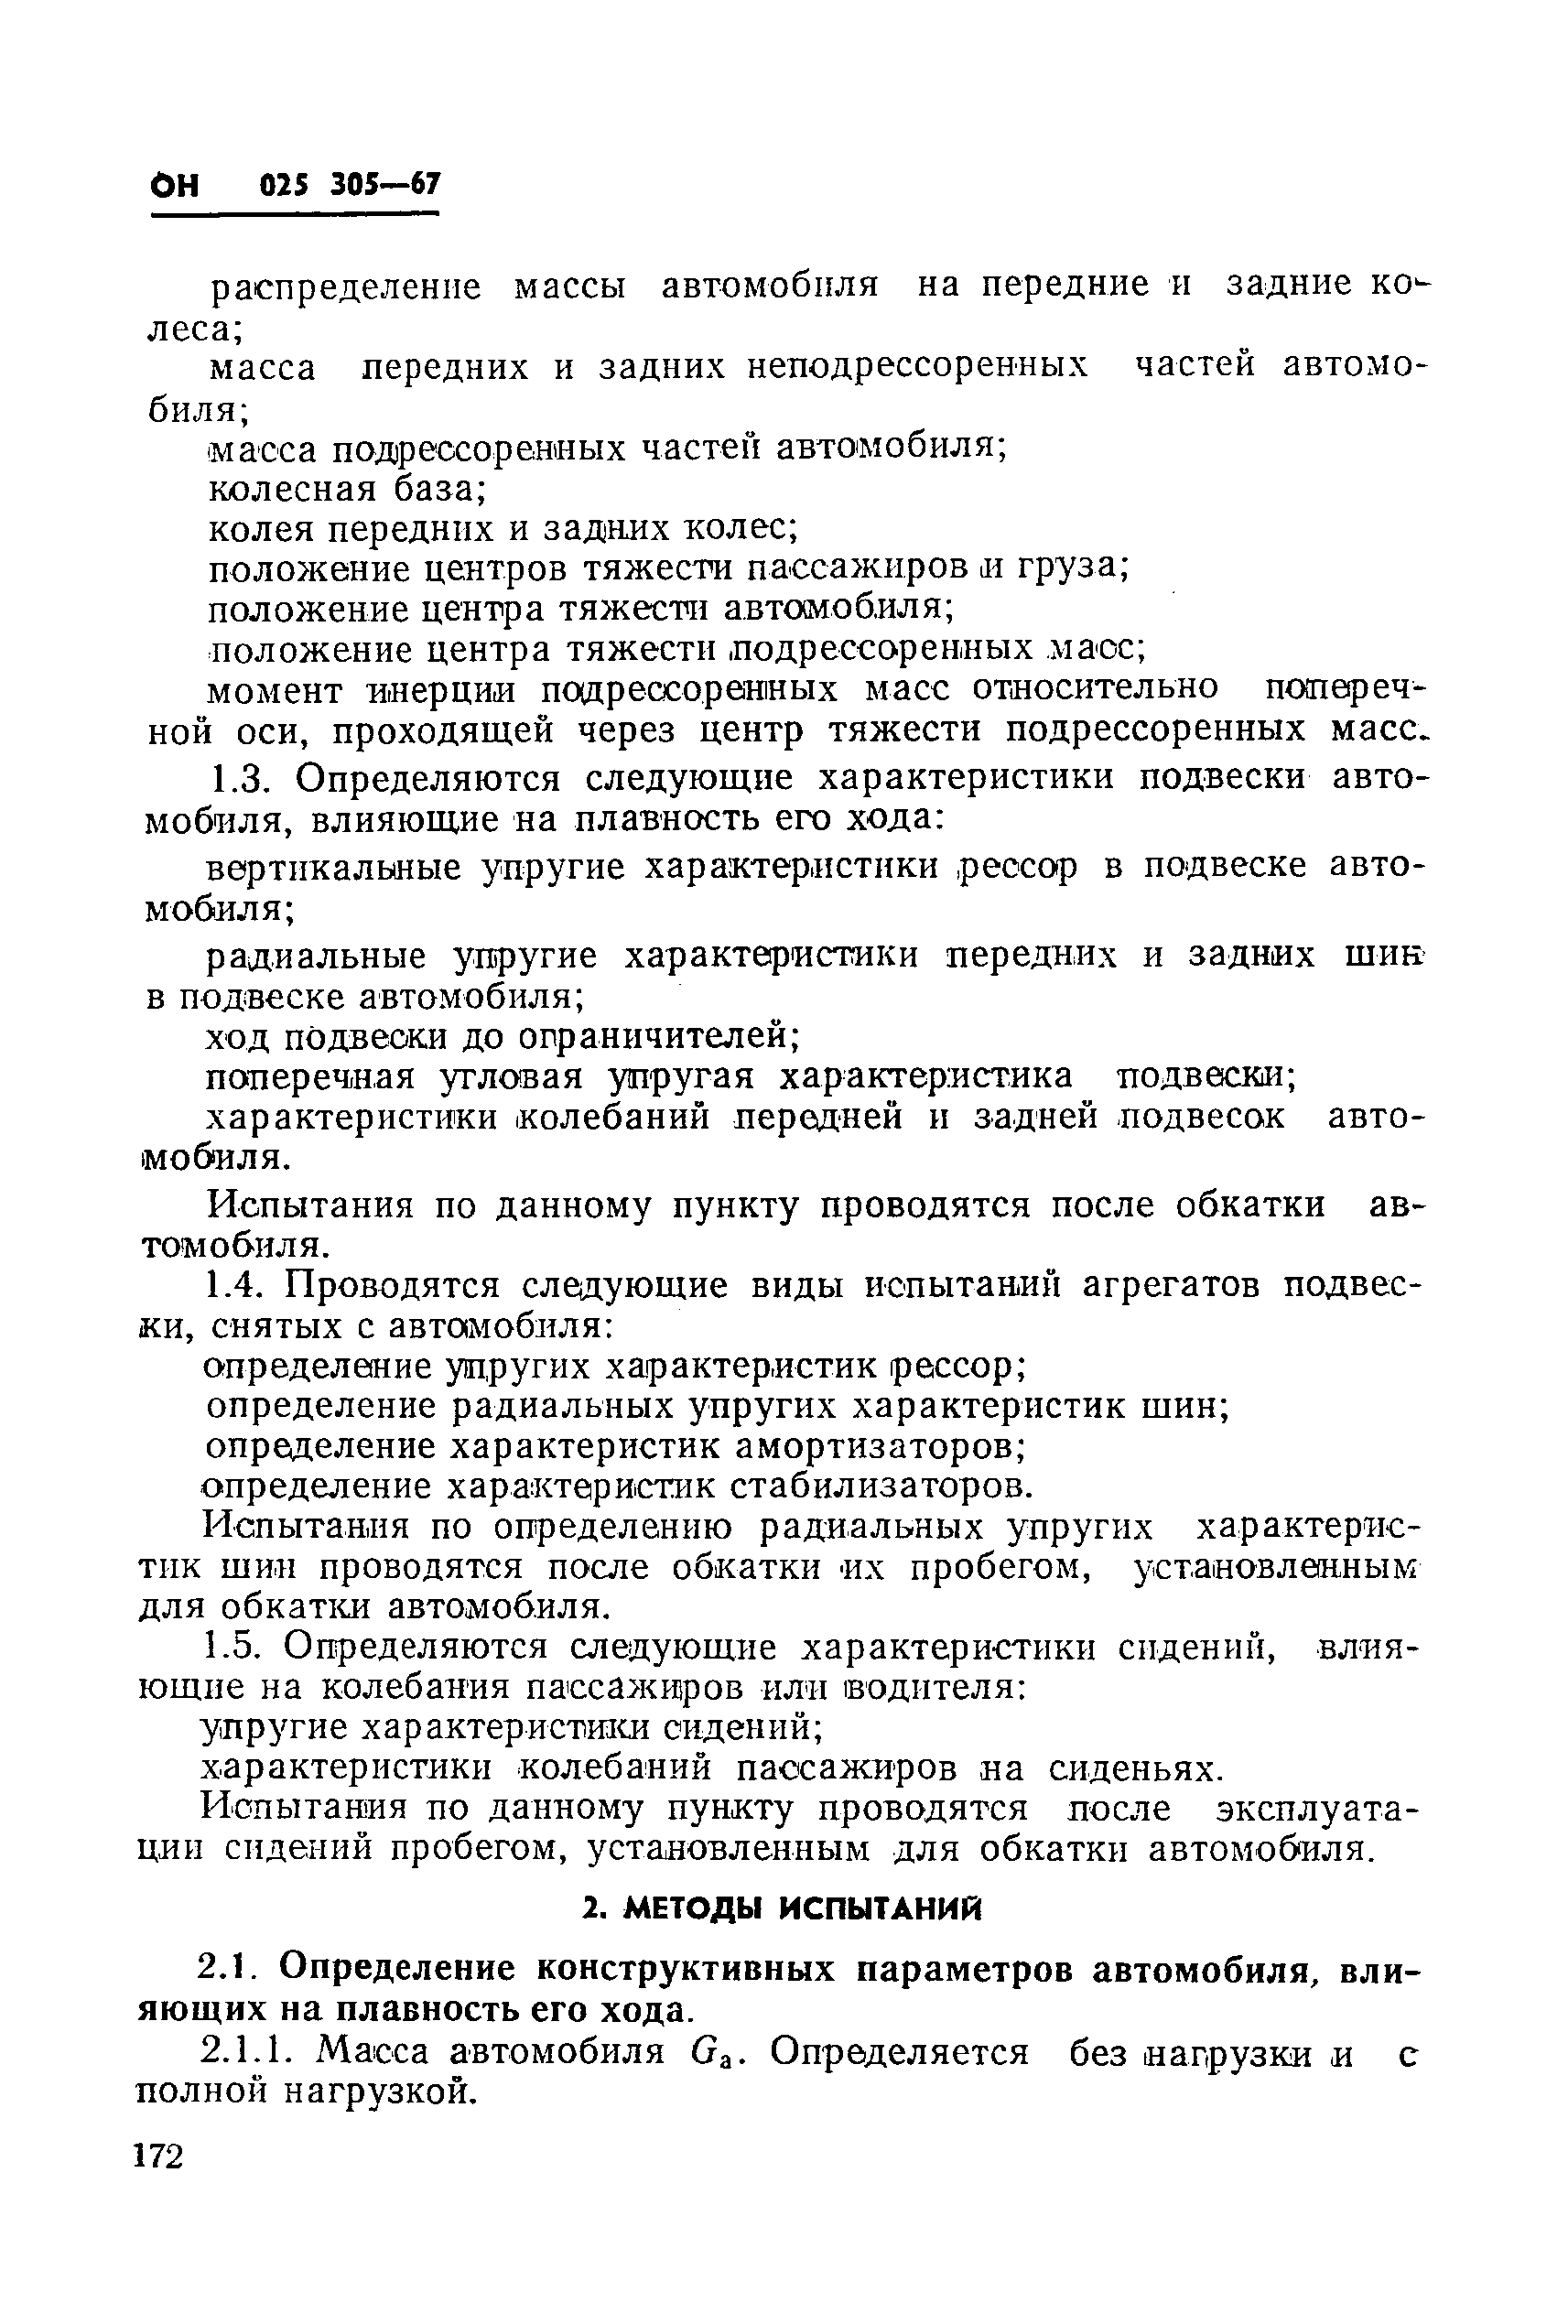 ОН 025 305-67